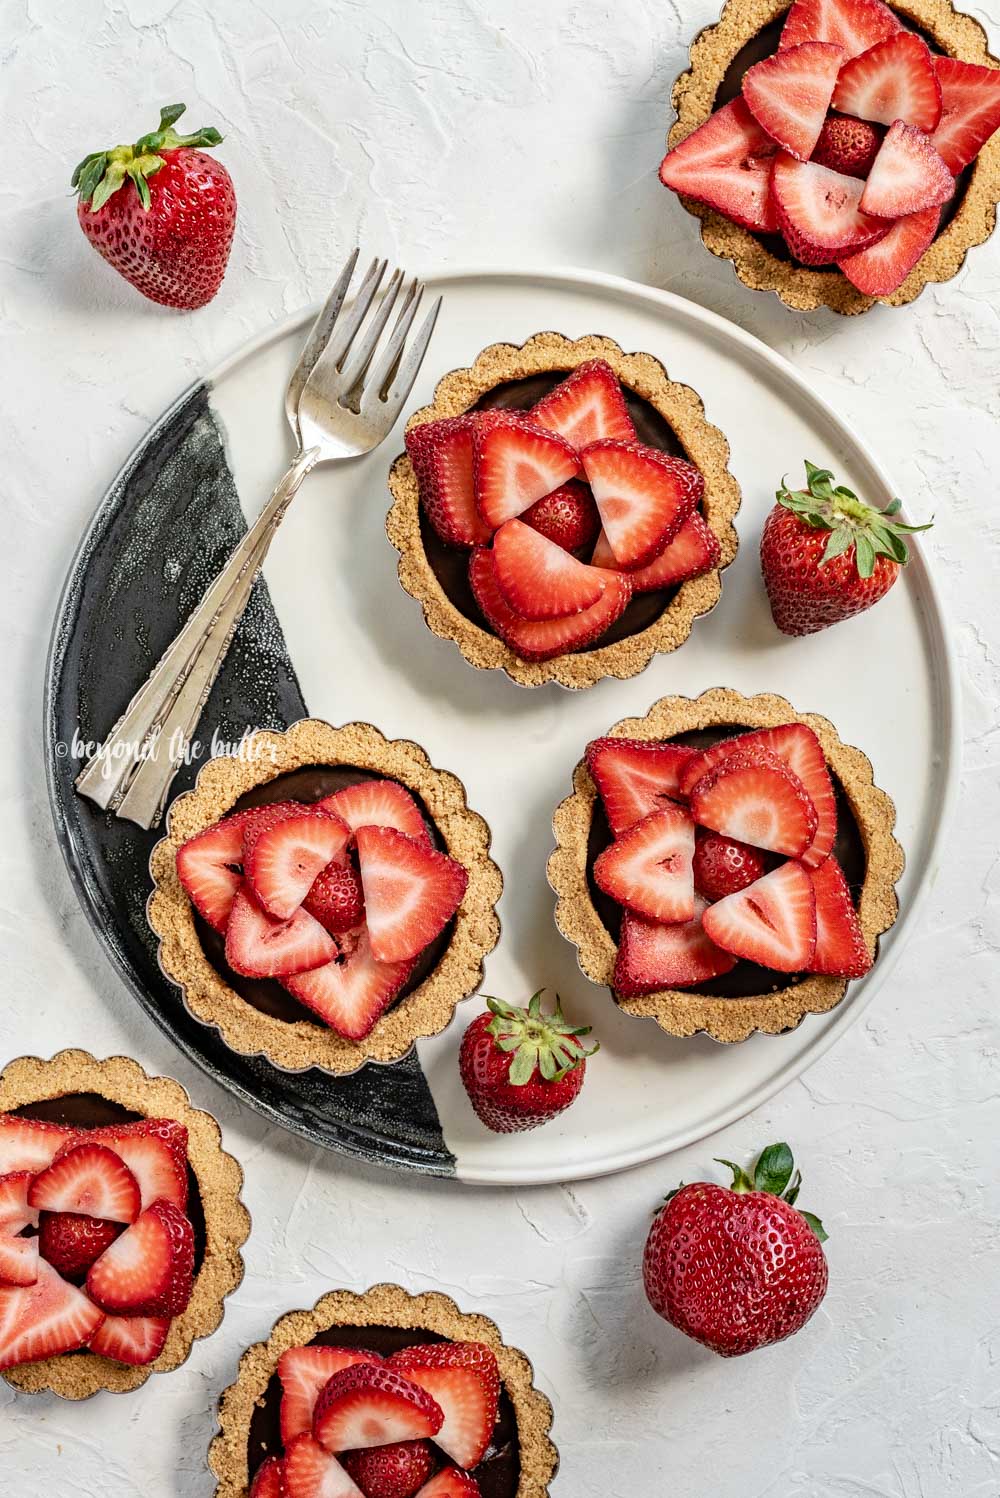 Overhead image of 6 mini strawberry nutella tarts on a black and white serving plate and randomly placed strawberries | All Images © Beyond the Butter™